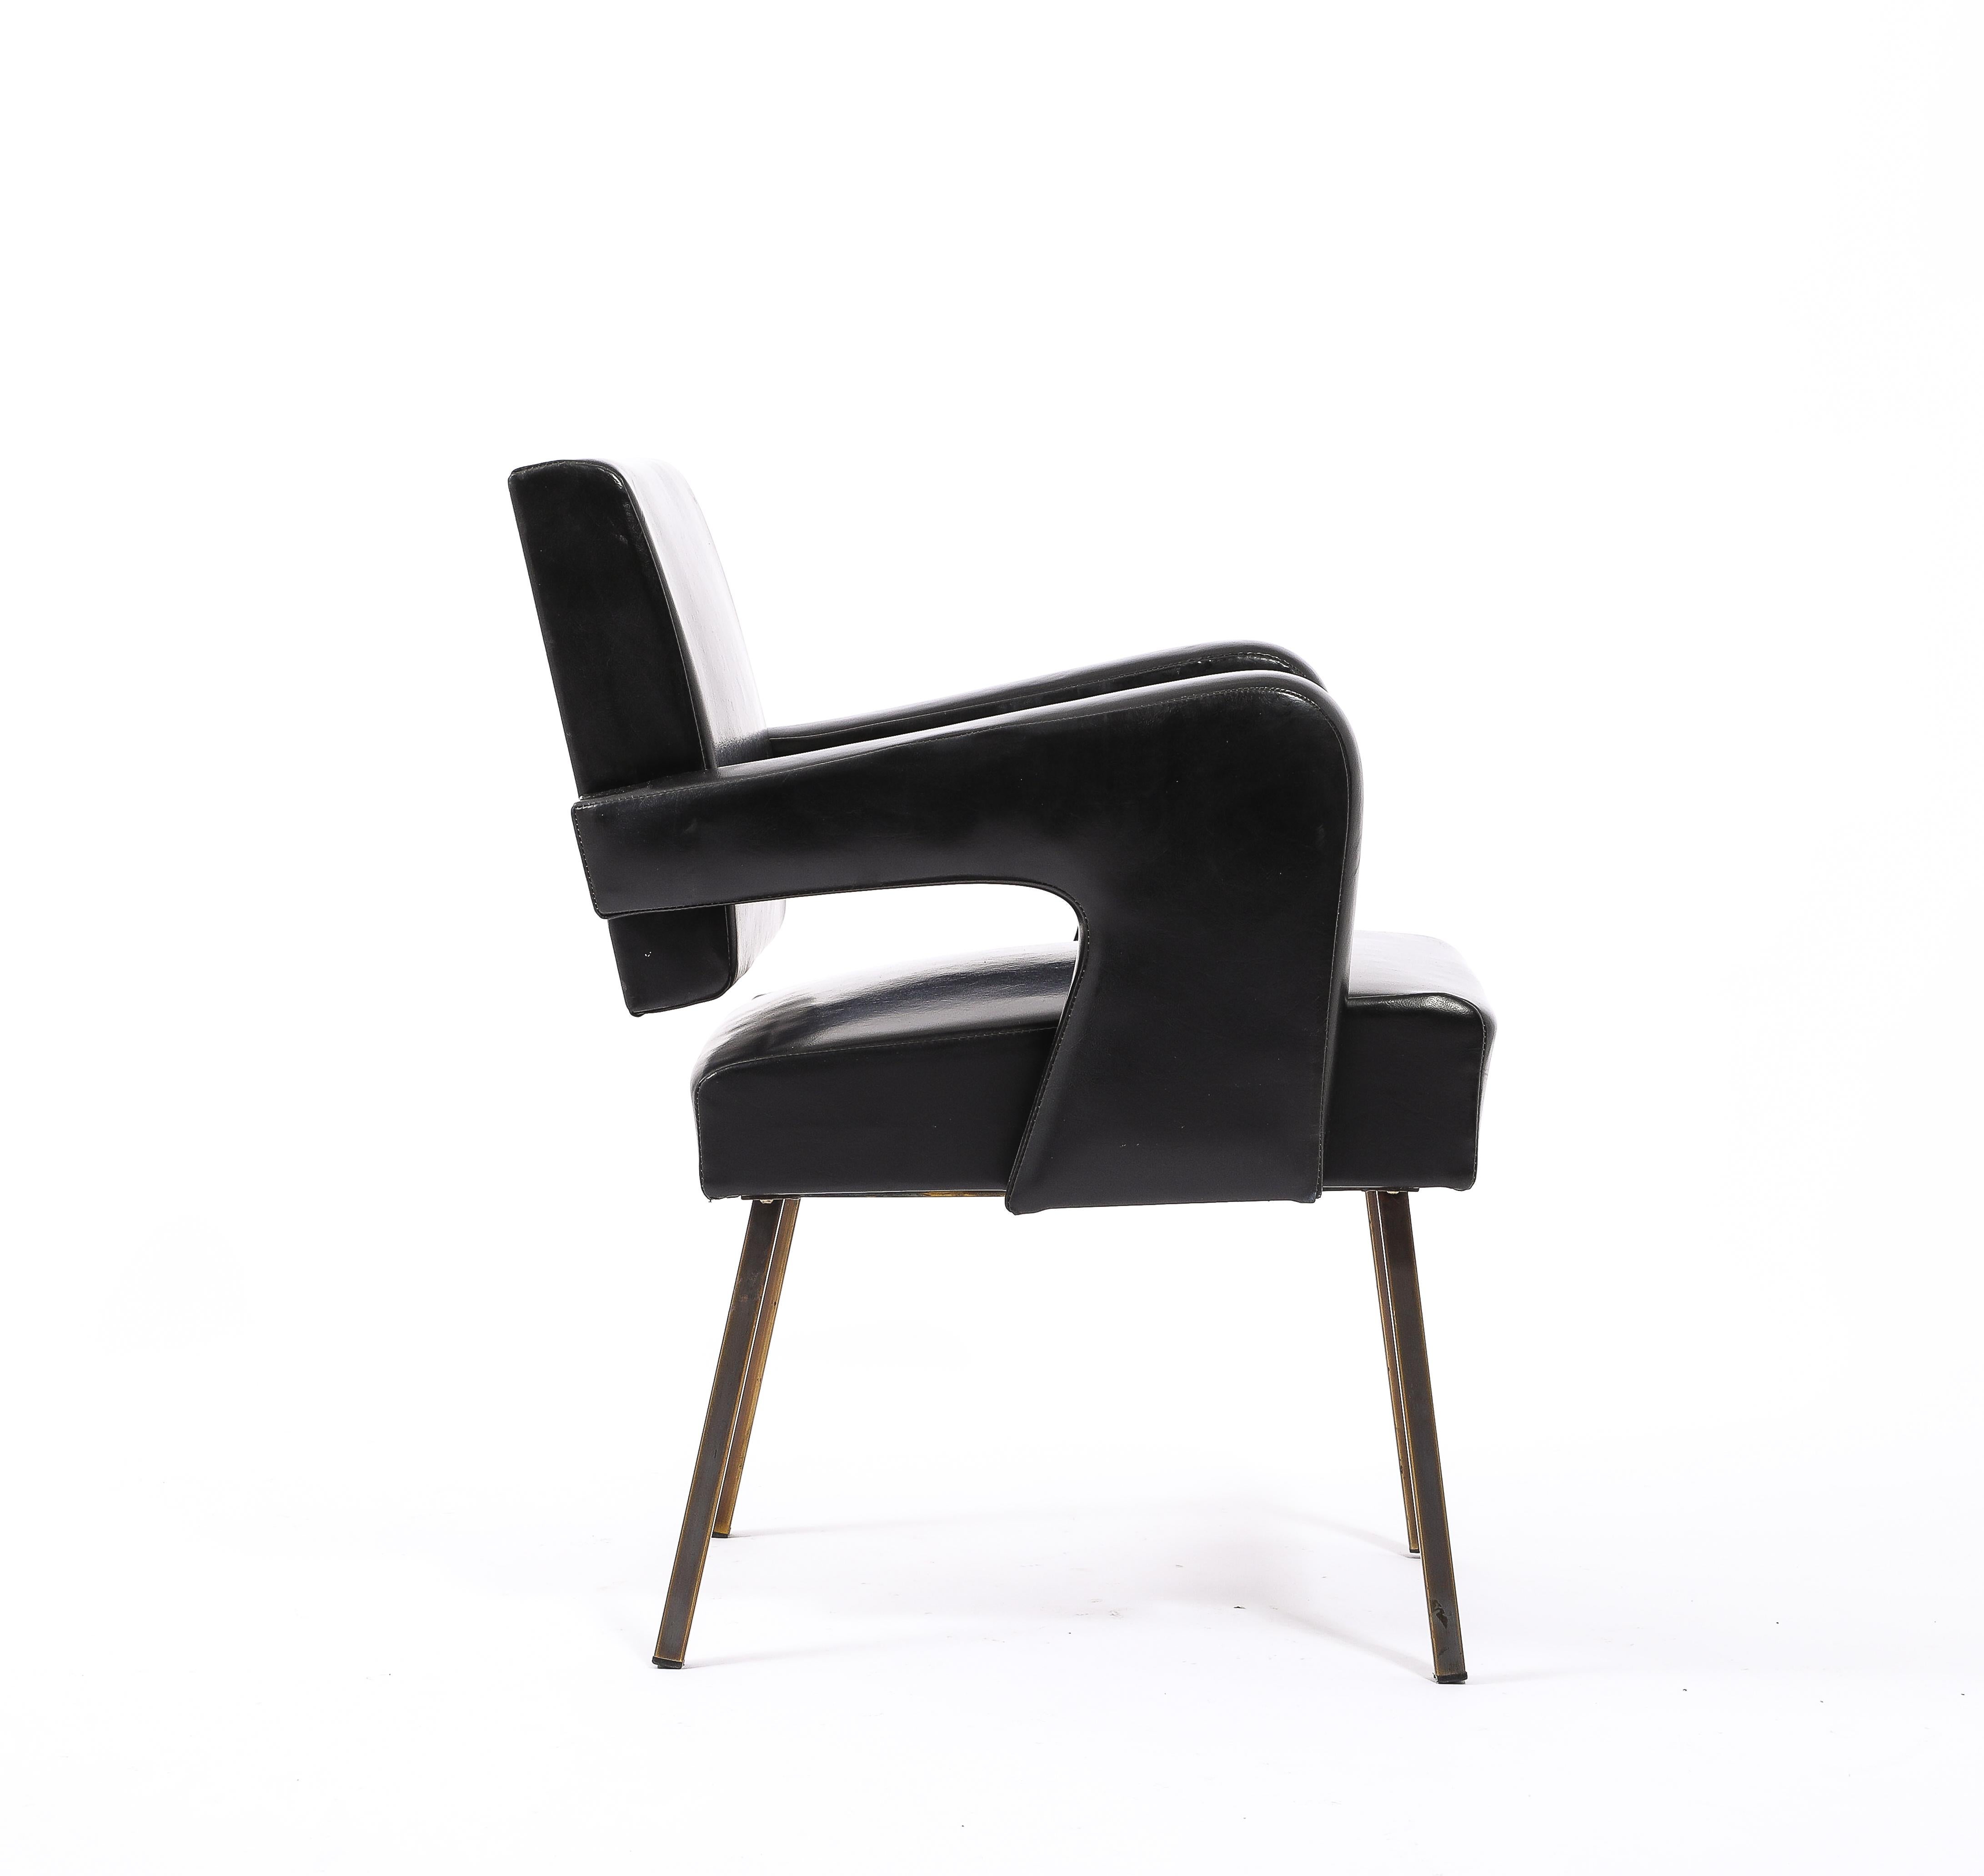 Jacques Adnet Black Vinyl & Brass Armchairs, France 1950's For Sale 1